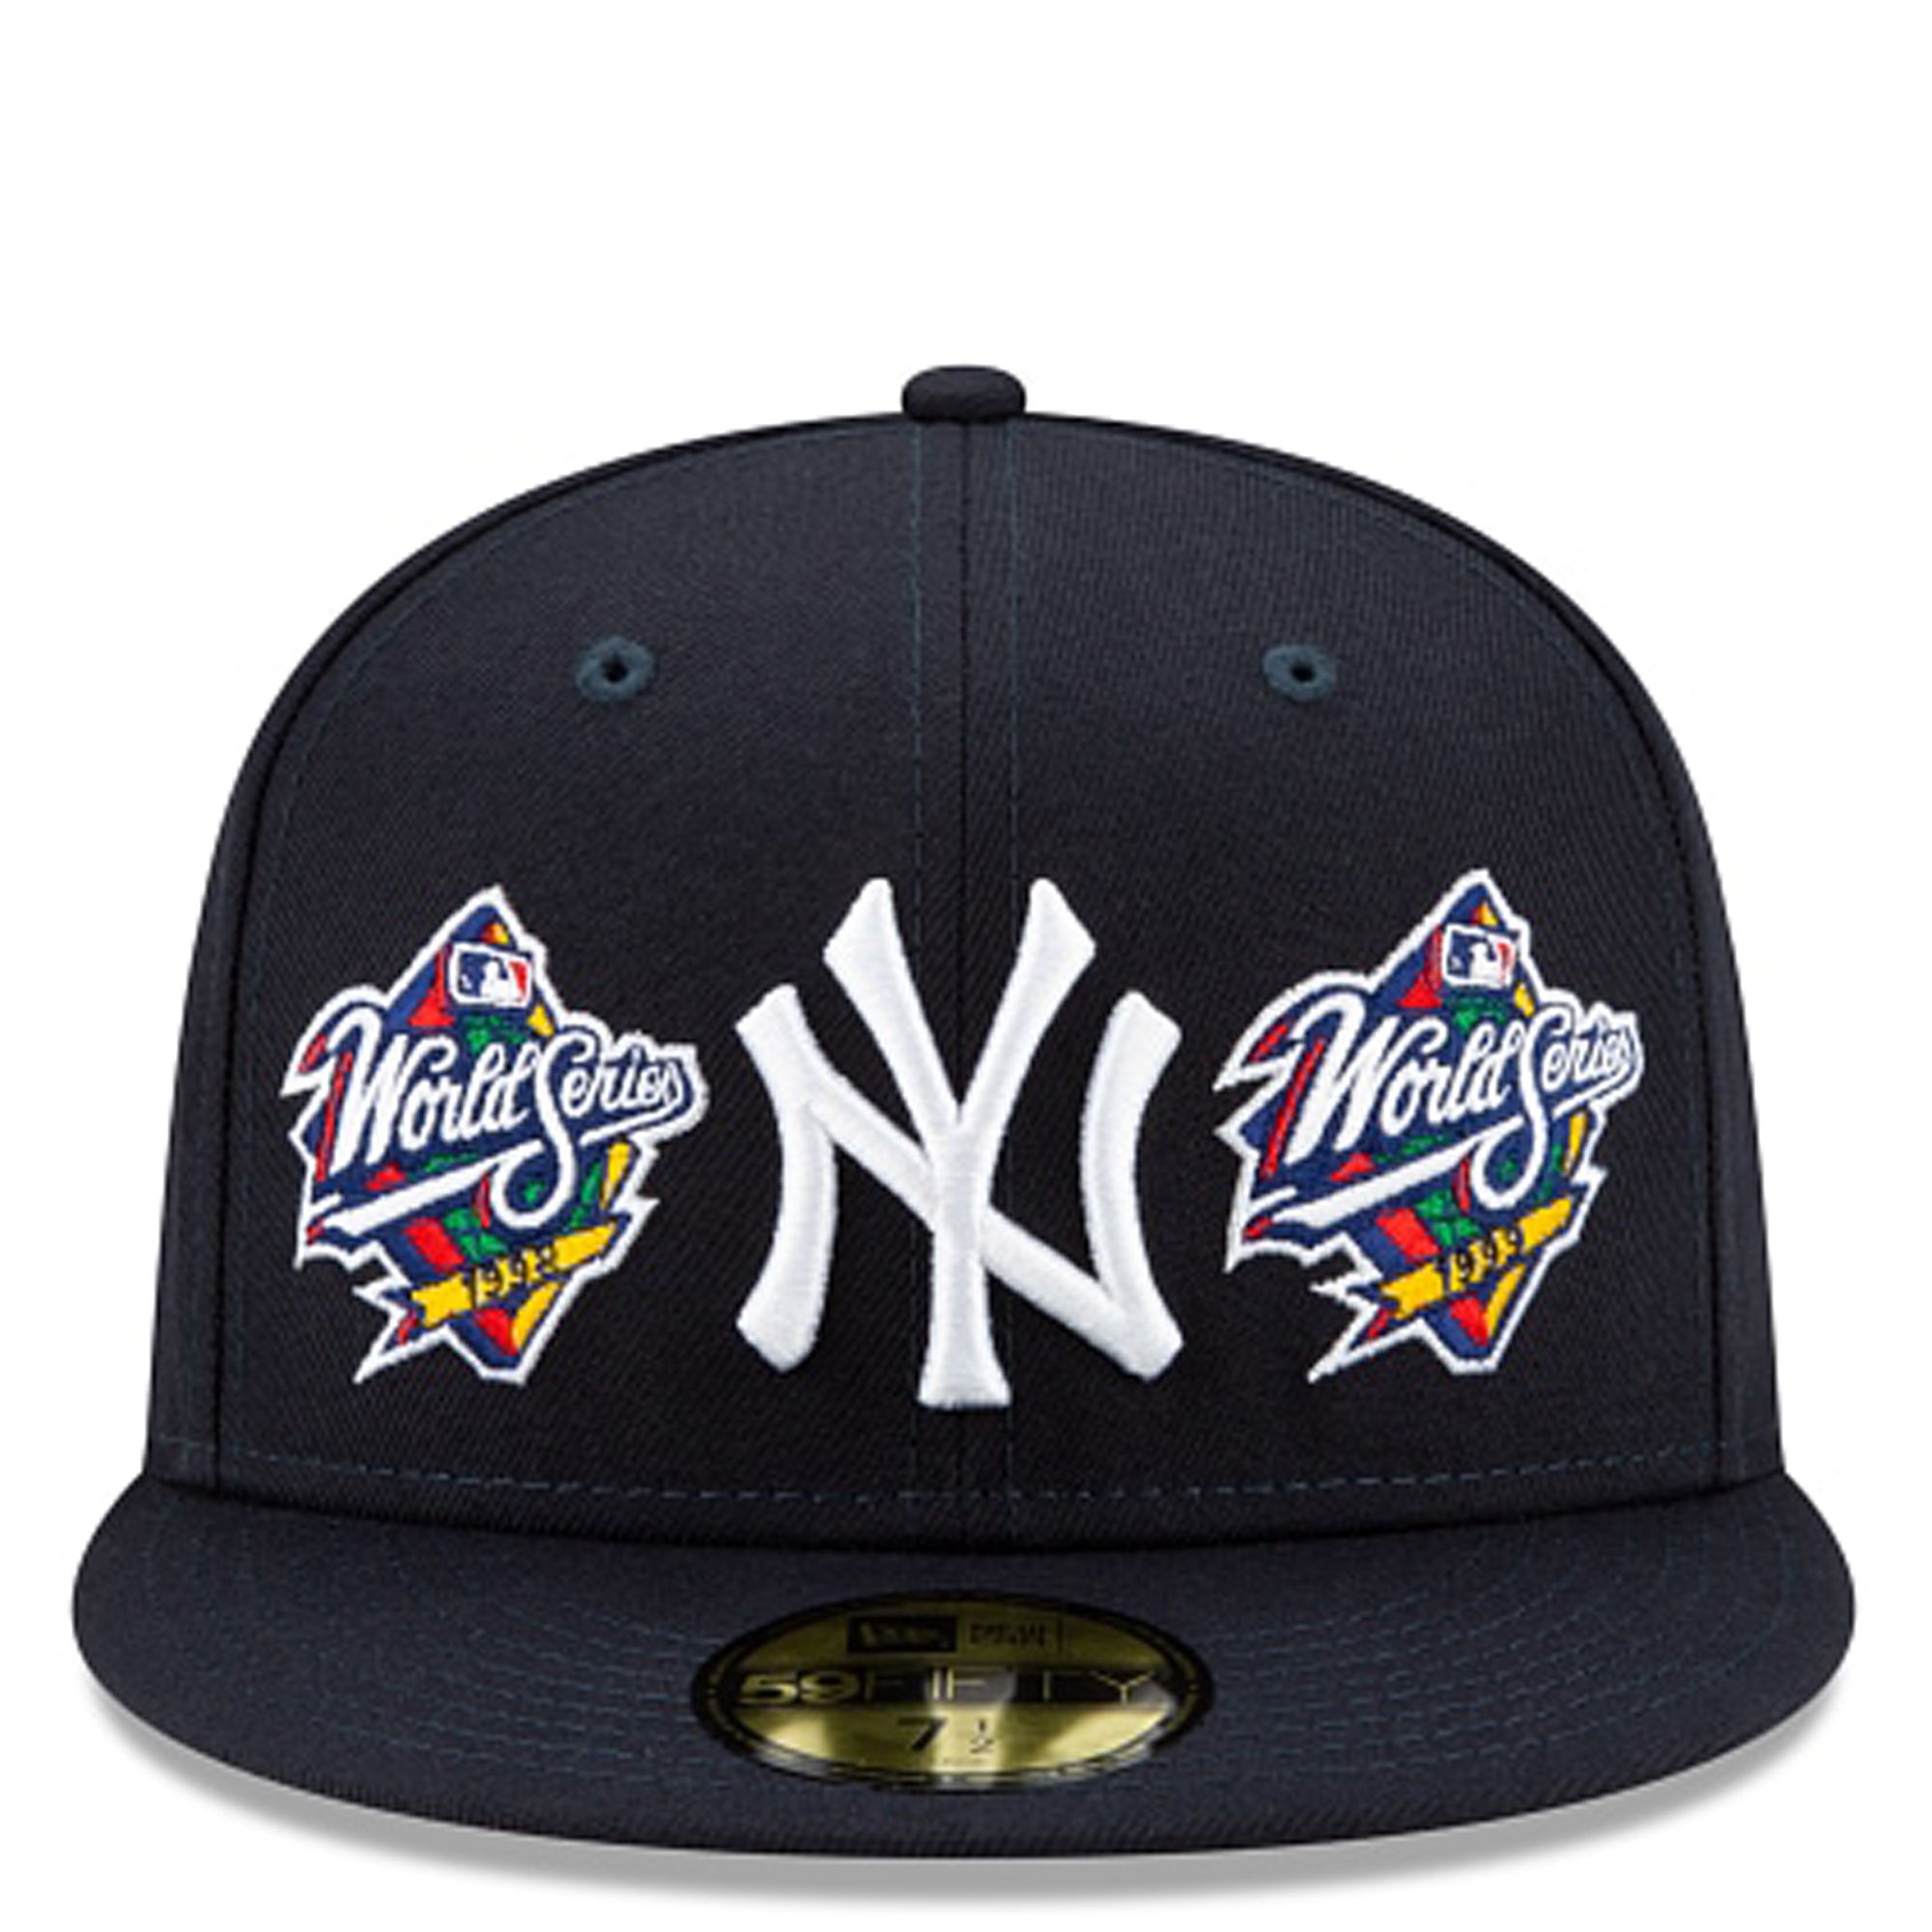 NEW YORK YANKEES 27X WORLD SERIES CHAMPIONS 59FIFTY FITTED HAT 60180943